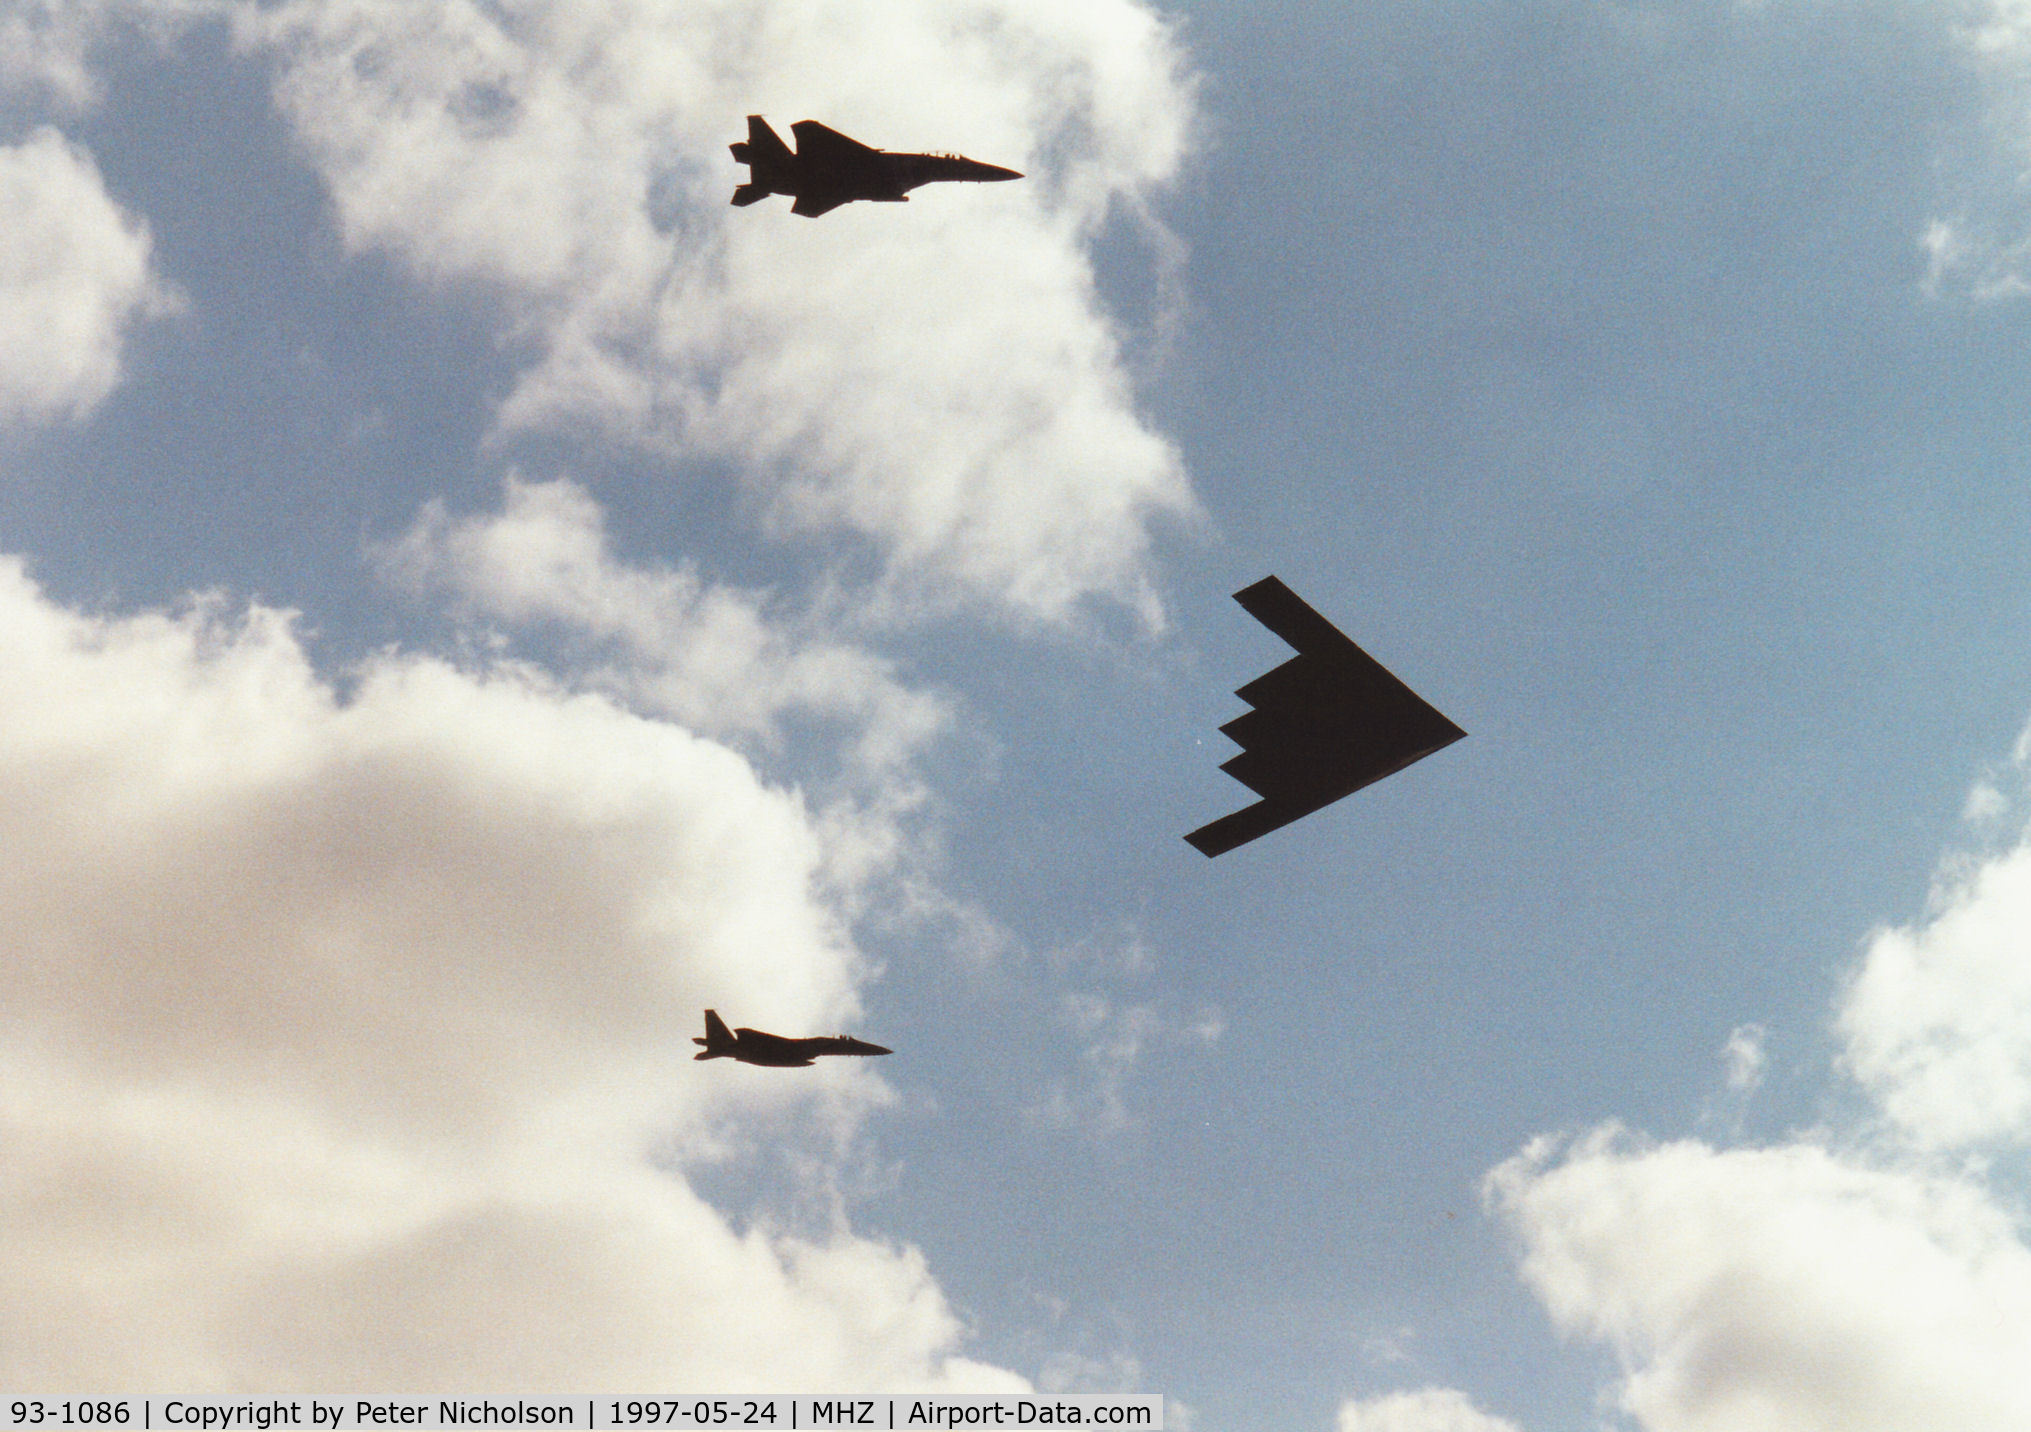 93-1086, 1993 Northrop Grumman B-2A Spirit C/N 1019/AV-19, B-2A Spirit of Whiteman AFB's 509th Bomb Wing with accompanying 48th Fighter Wing F-15E Strike Eagles 86-0174 and 90-0262 arriving at the 1997 RAF Mildenhall Air Fete.